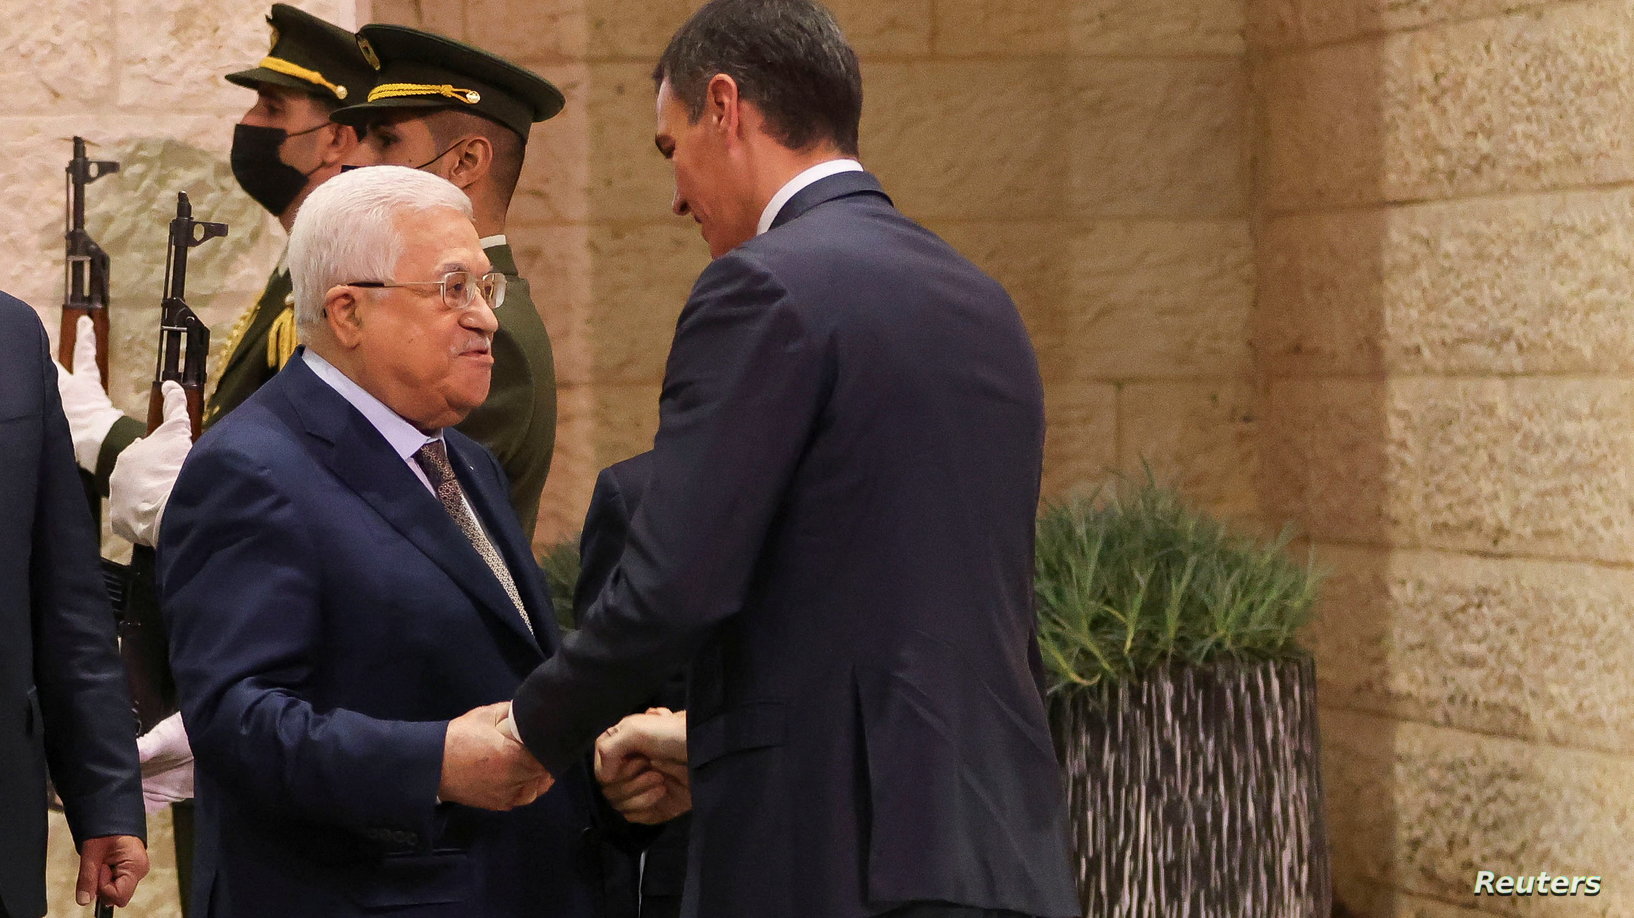 Spain to recognize Palestinian statehood by July: Reports